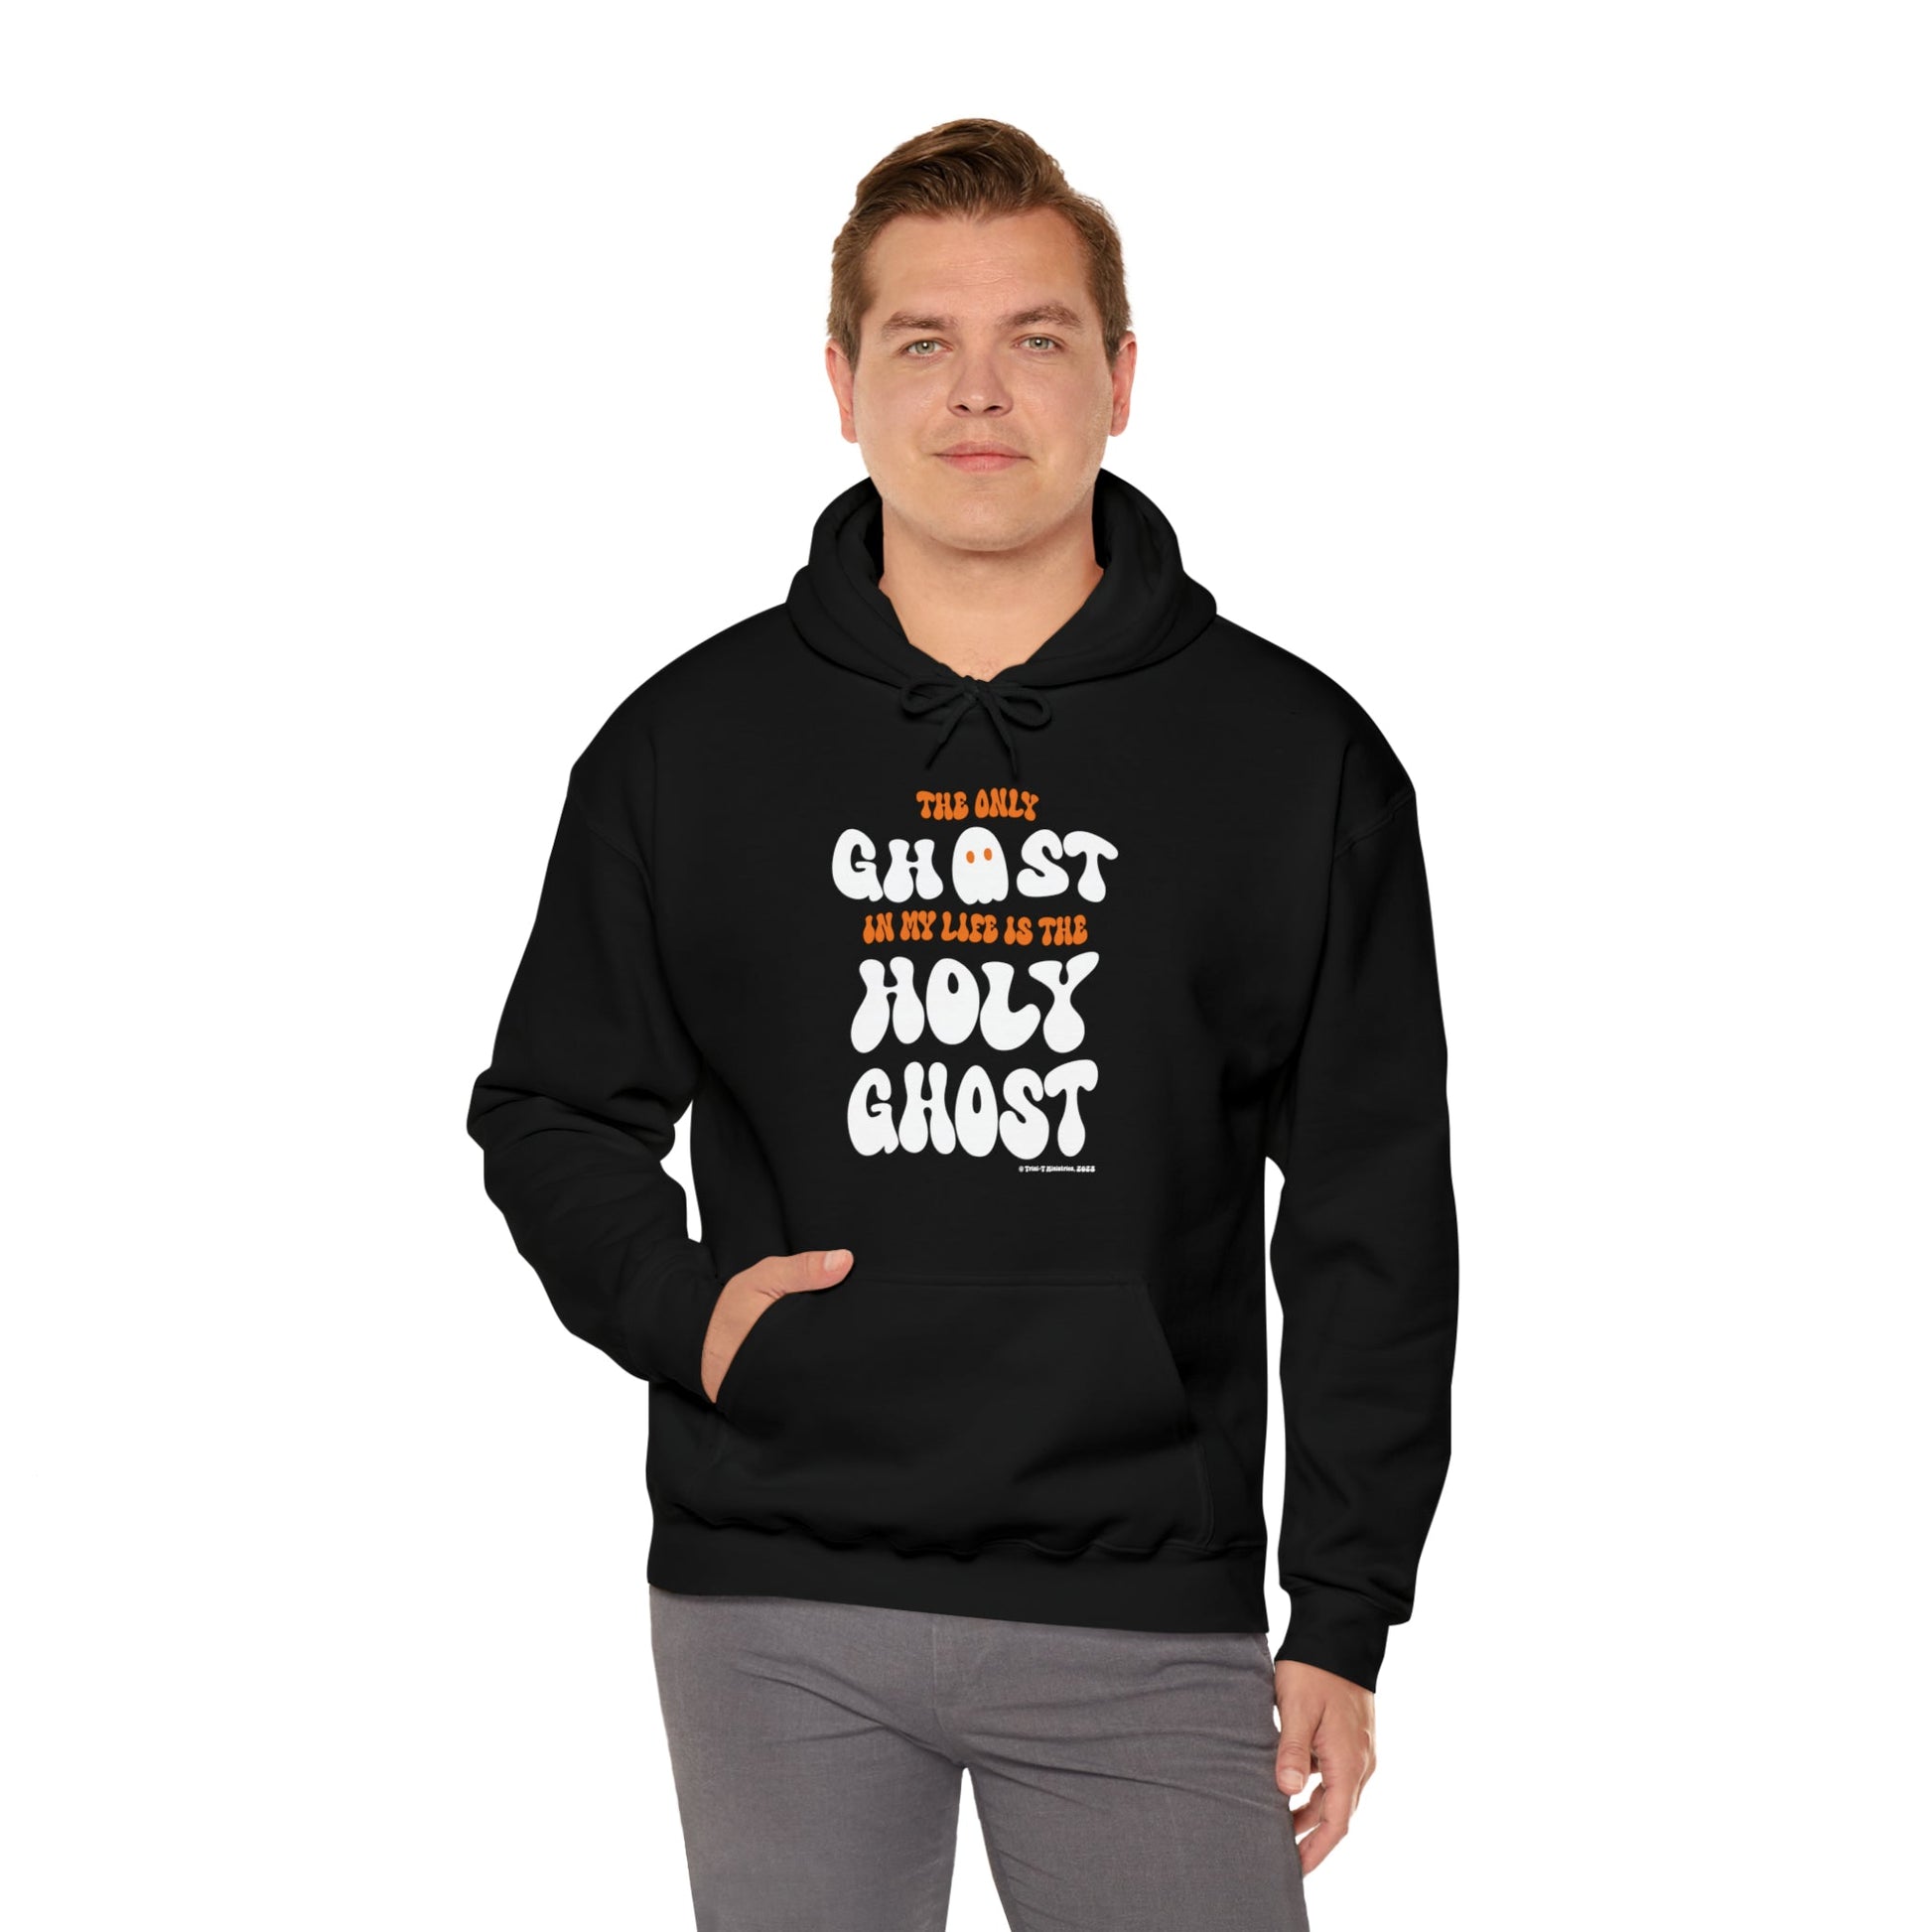 Only Holy Ghost - Hoodie - Trini-T Ministries